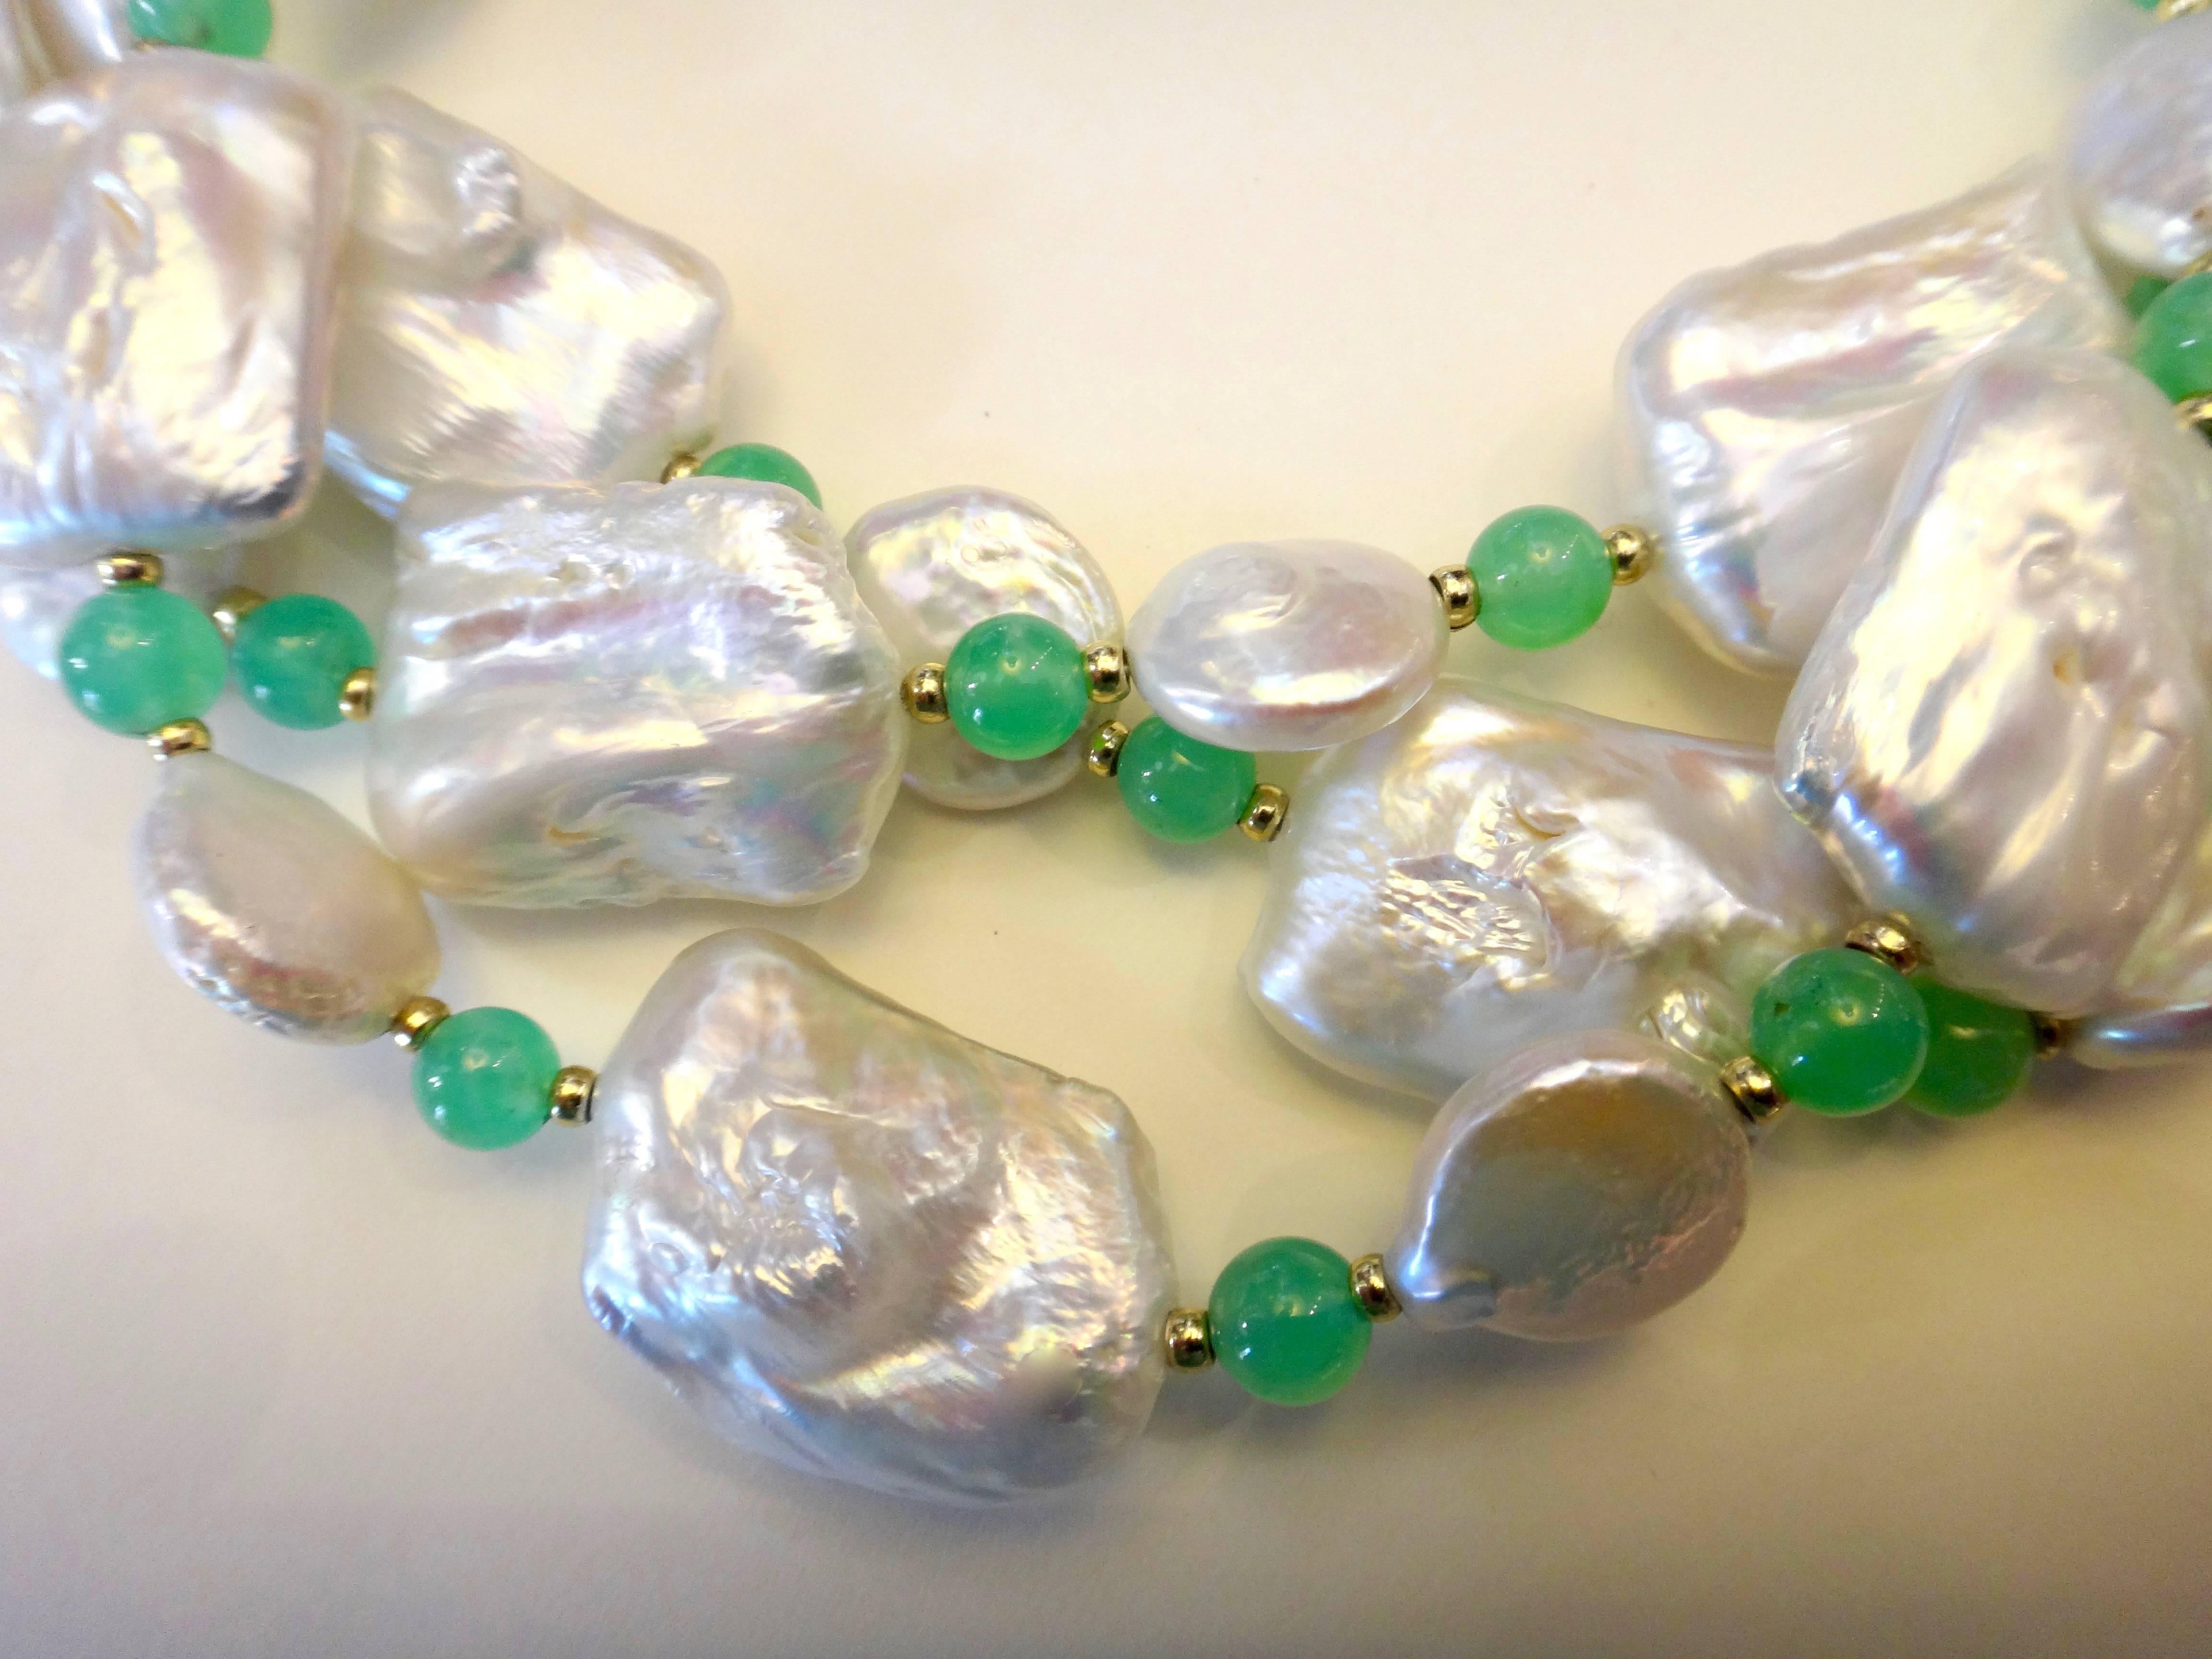 White tile pearls are spaced with smaller white coin pearls, chrysoprase beads and rondel spacers.  The necklace is 39 inches long and can be worn as a single or double strand necklace.  Vermeil hook clasp.